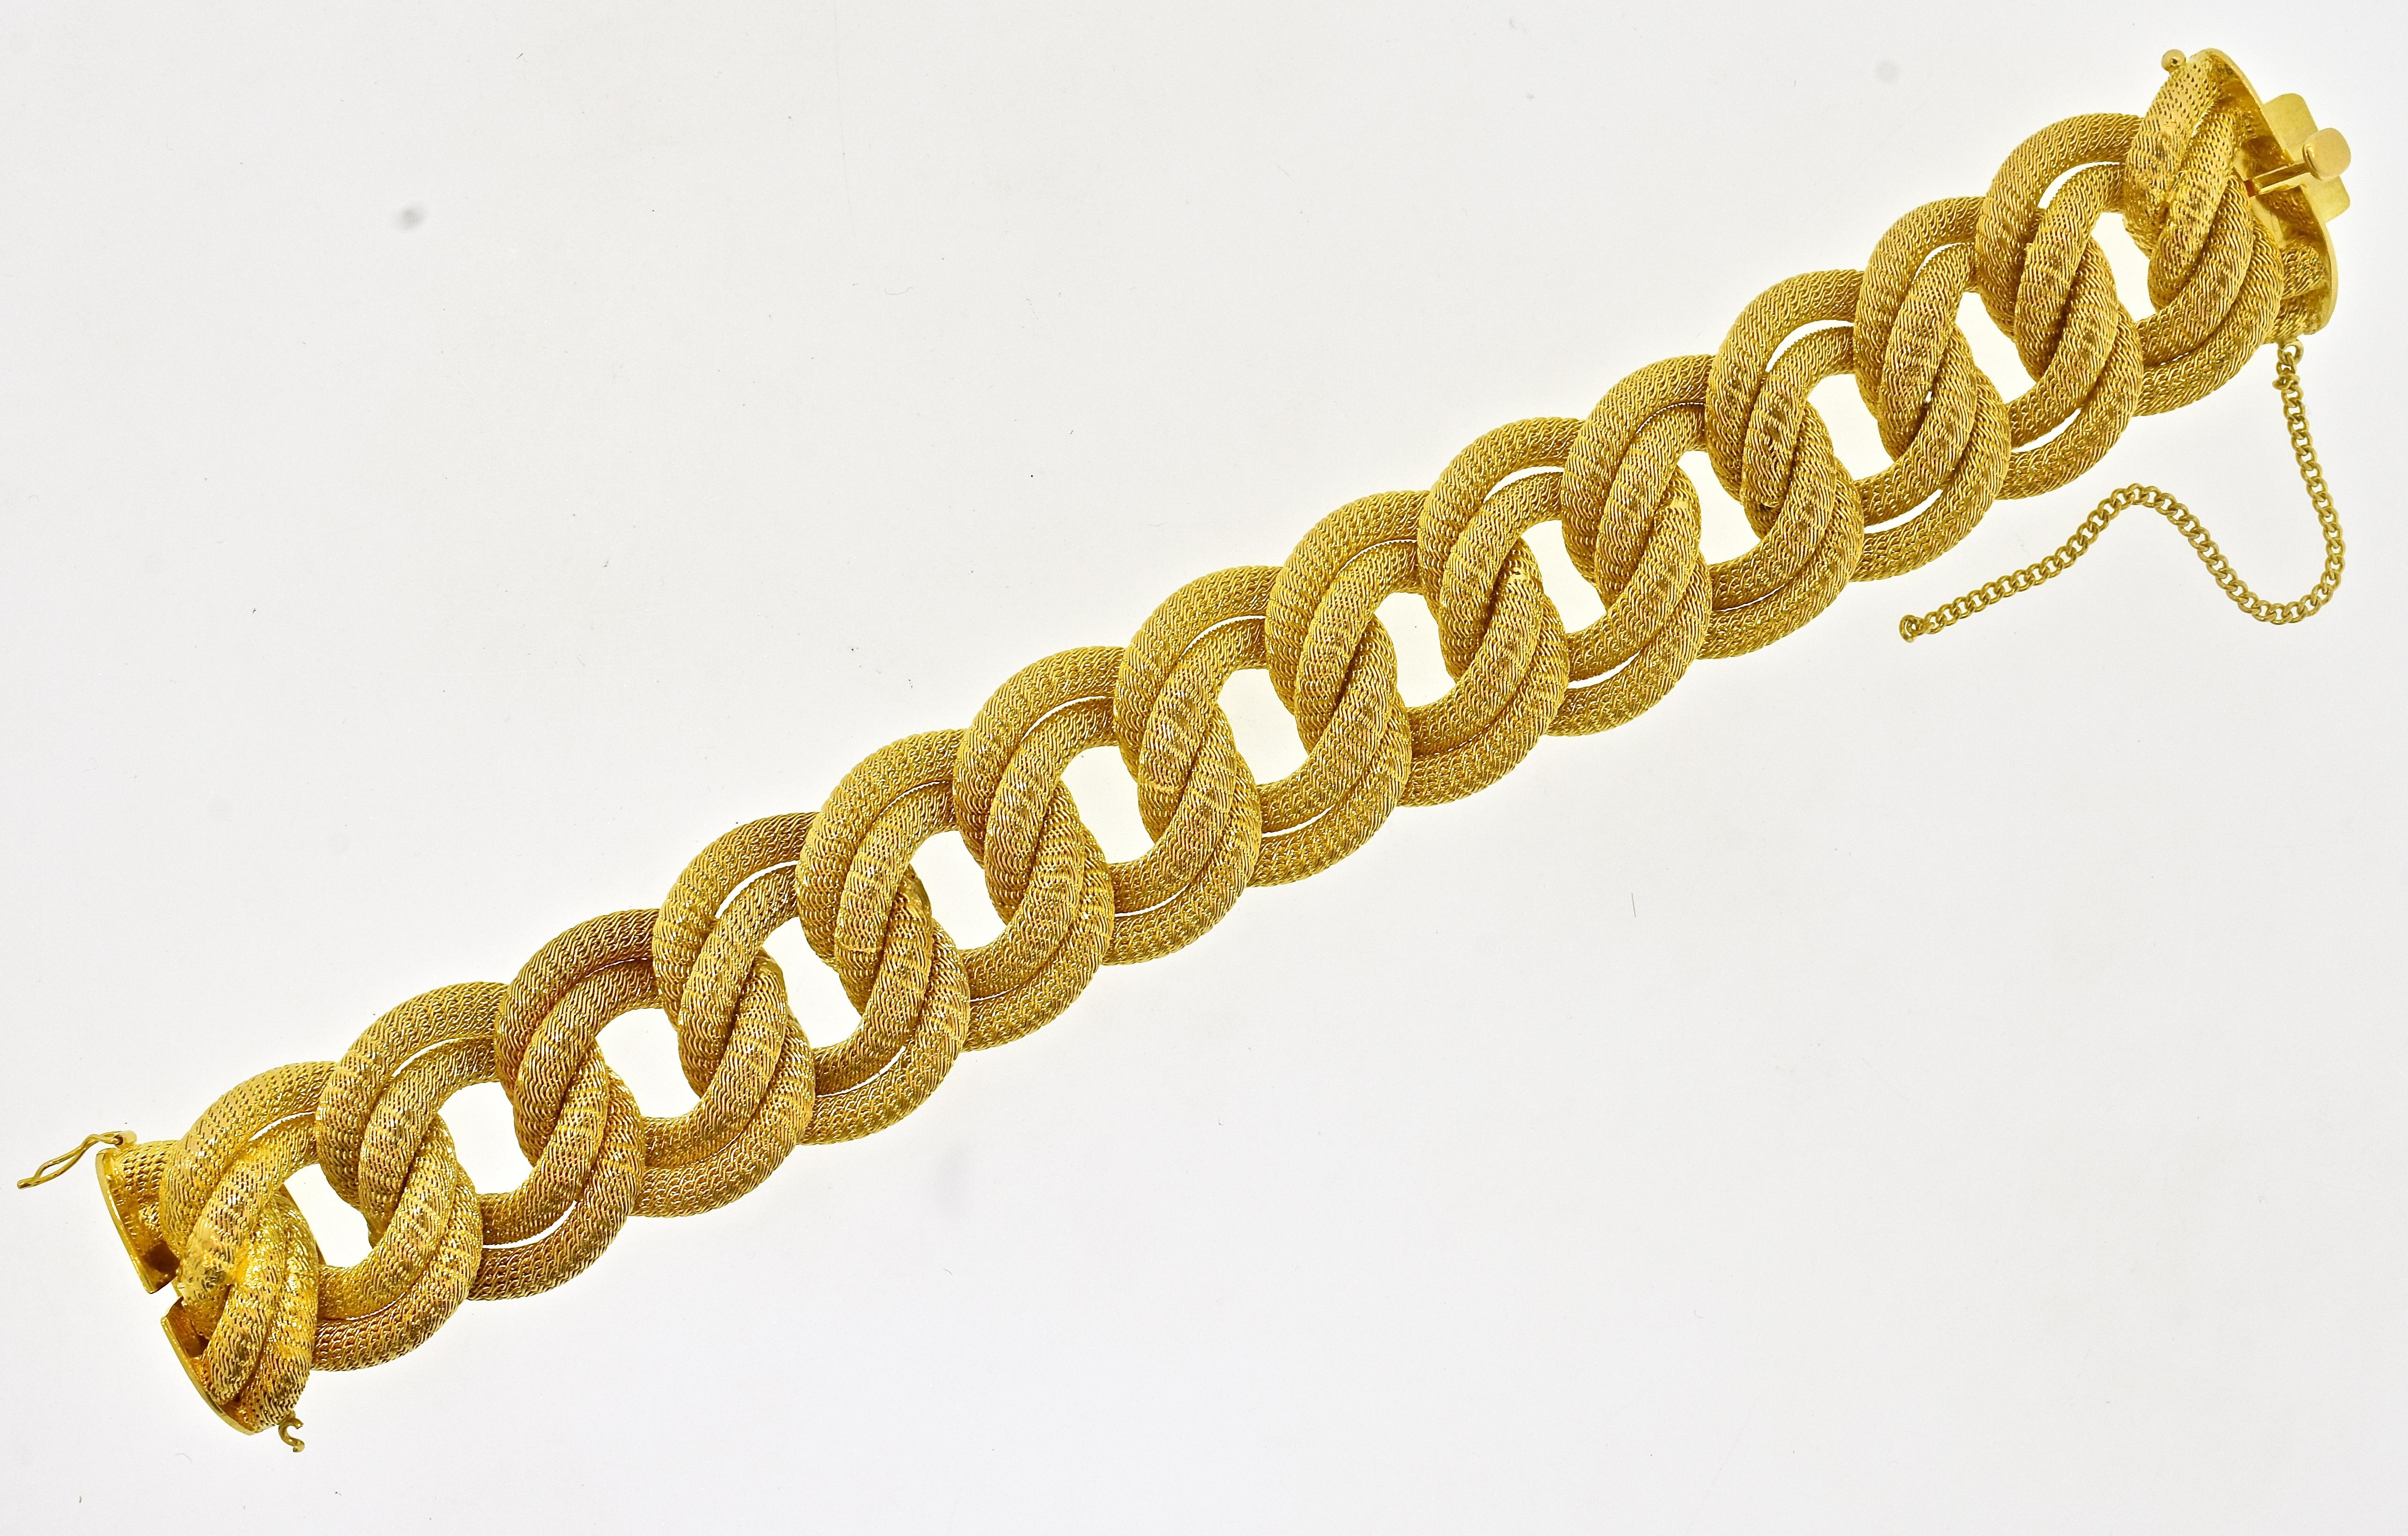 Vintage bold woven link 18K bracelet weighing 89.09 grams, width of 1.1/8th inches and a length of 8 inches.  One of the most appealing aspects of this bracelet is its bright, vivid, rich yellow gold color.  Made circa 1960 in Europe with European